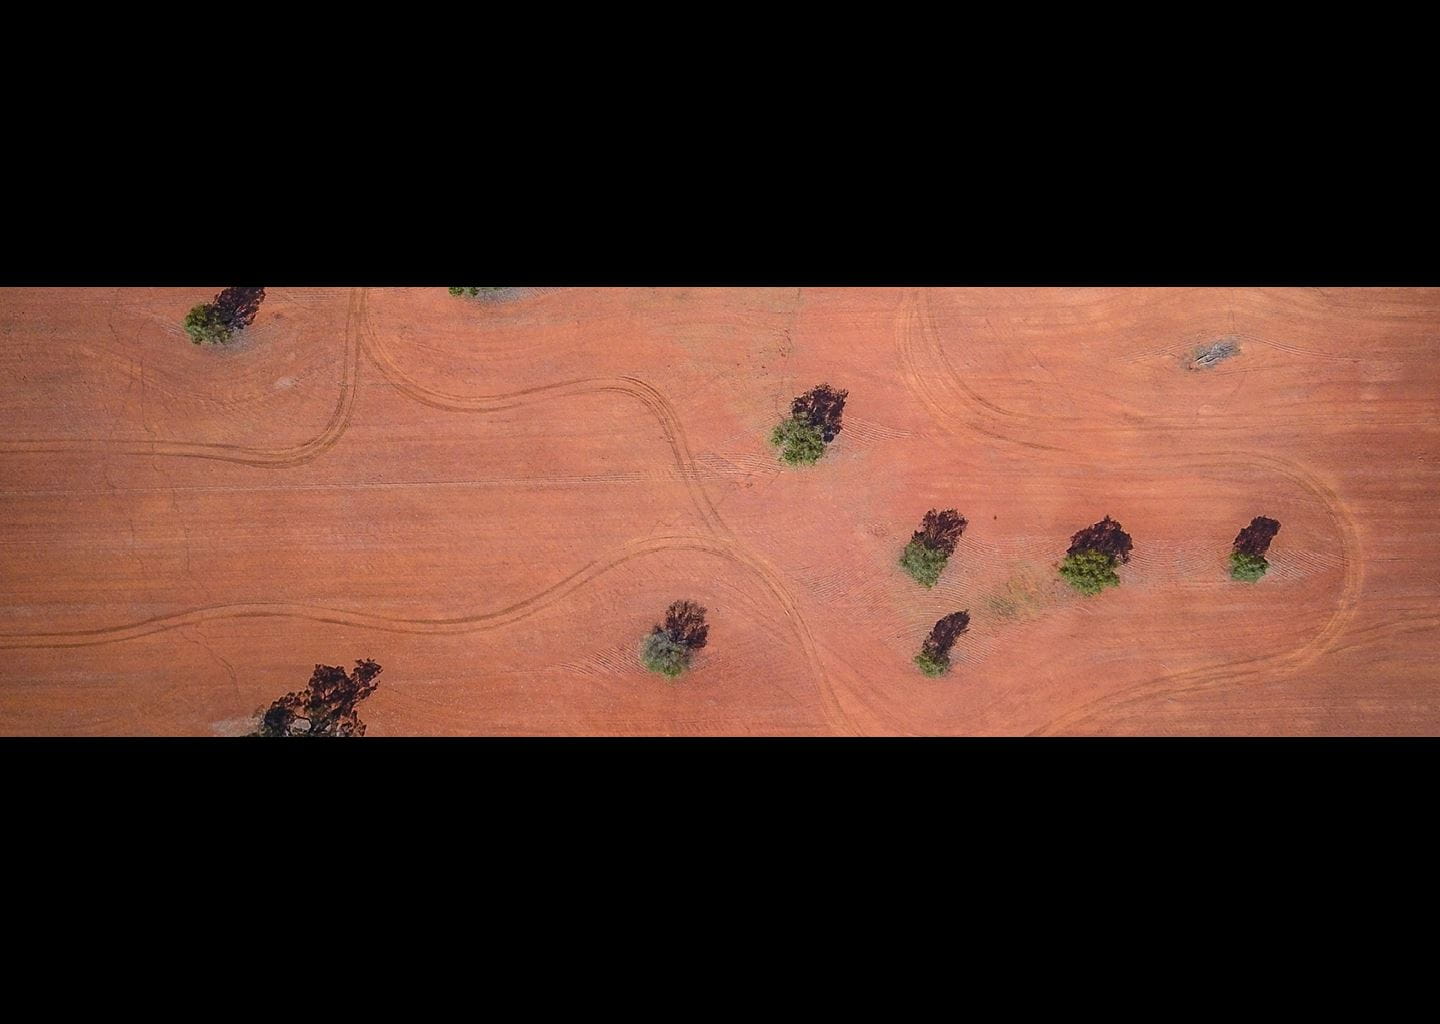 Aerial of widely spaced trees on red dry soil